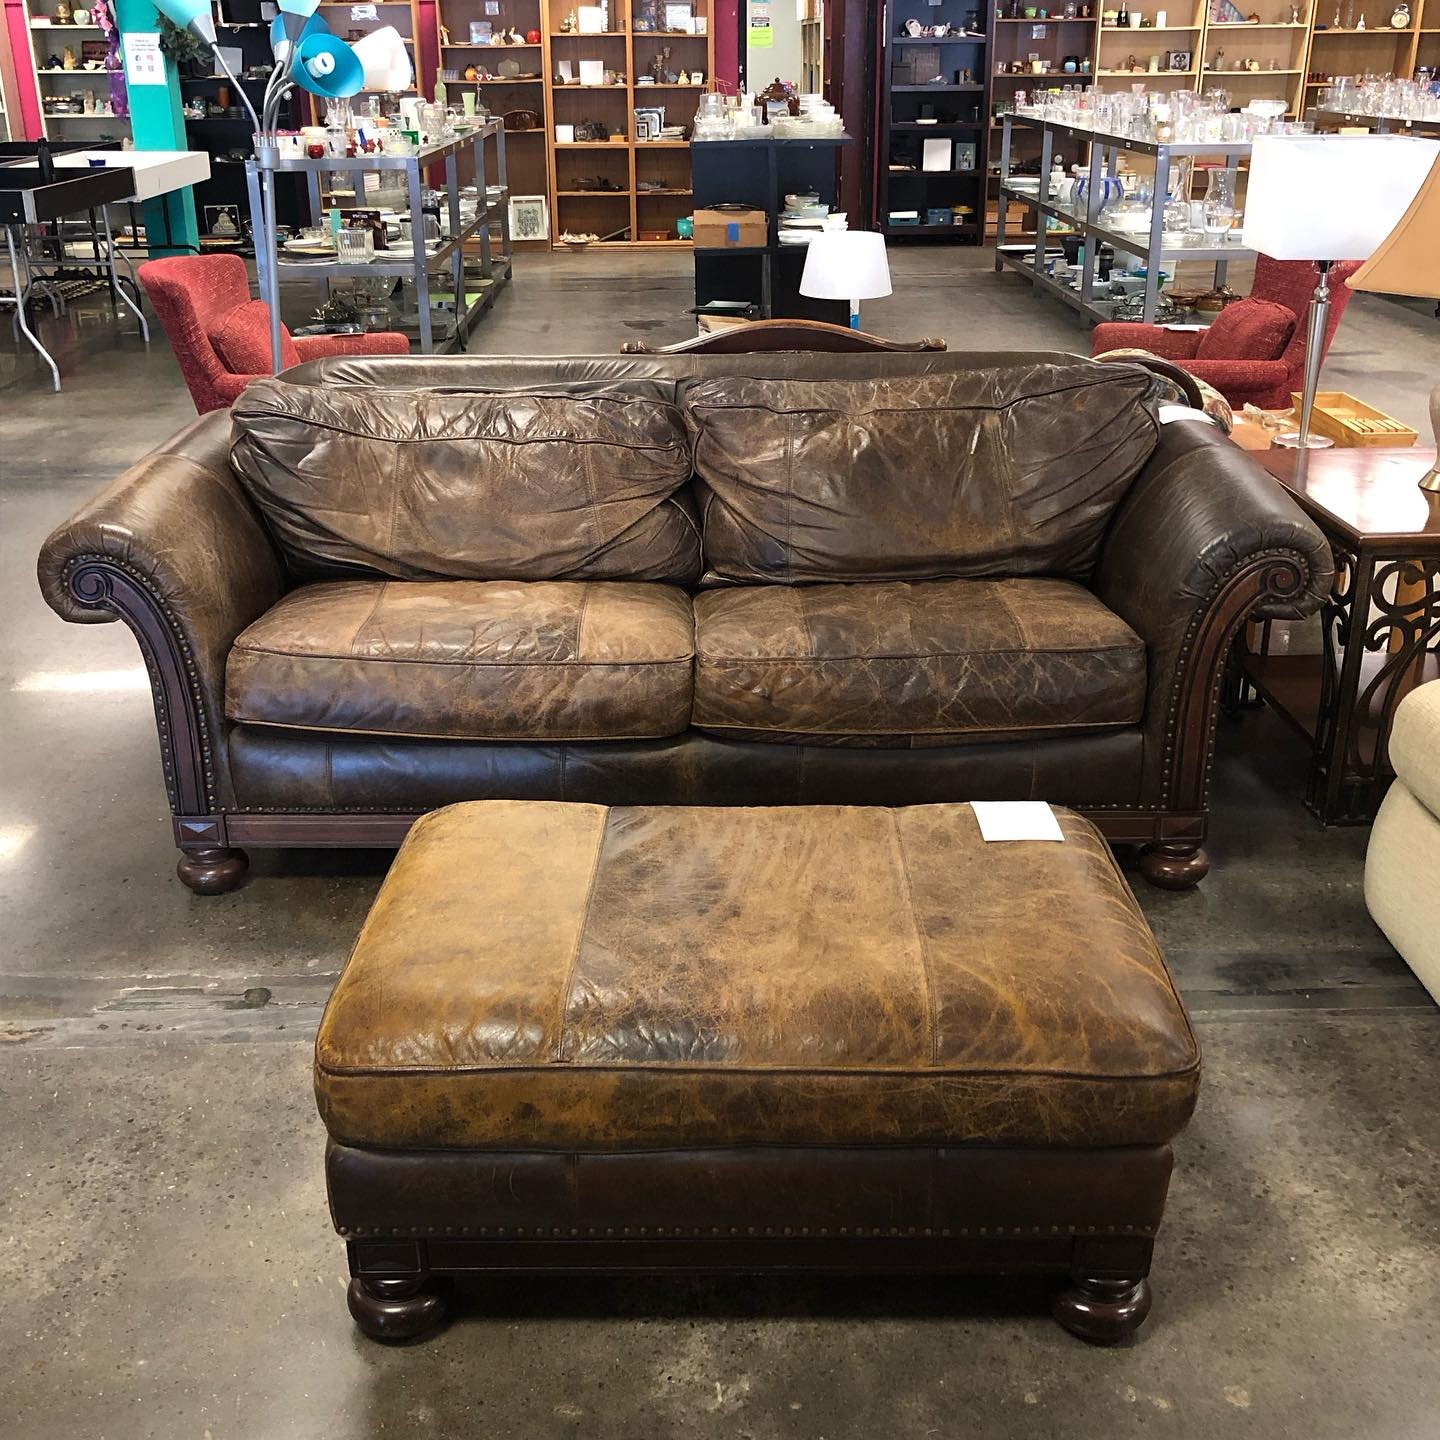 We can deliver your furniture purchase for $55. Come see us! We&rsquo;re open 10am-6pm at 1407 Sherwood Ave. RVA 23220 (804) 353-8890. DiversityThrift.org
#furniture #thriftfurniture #usedfurniture